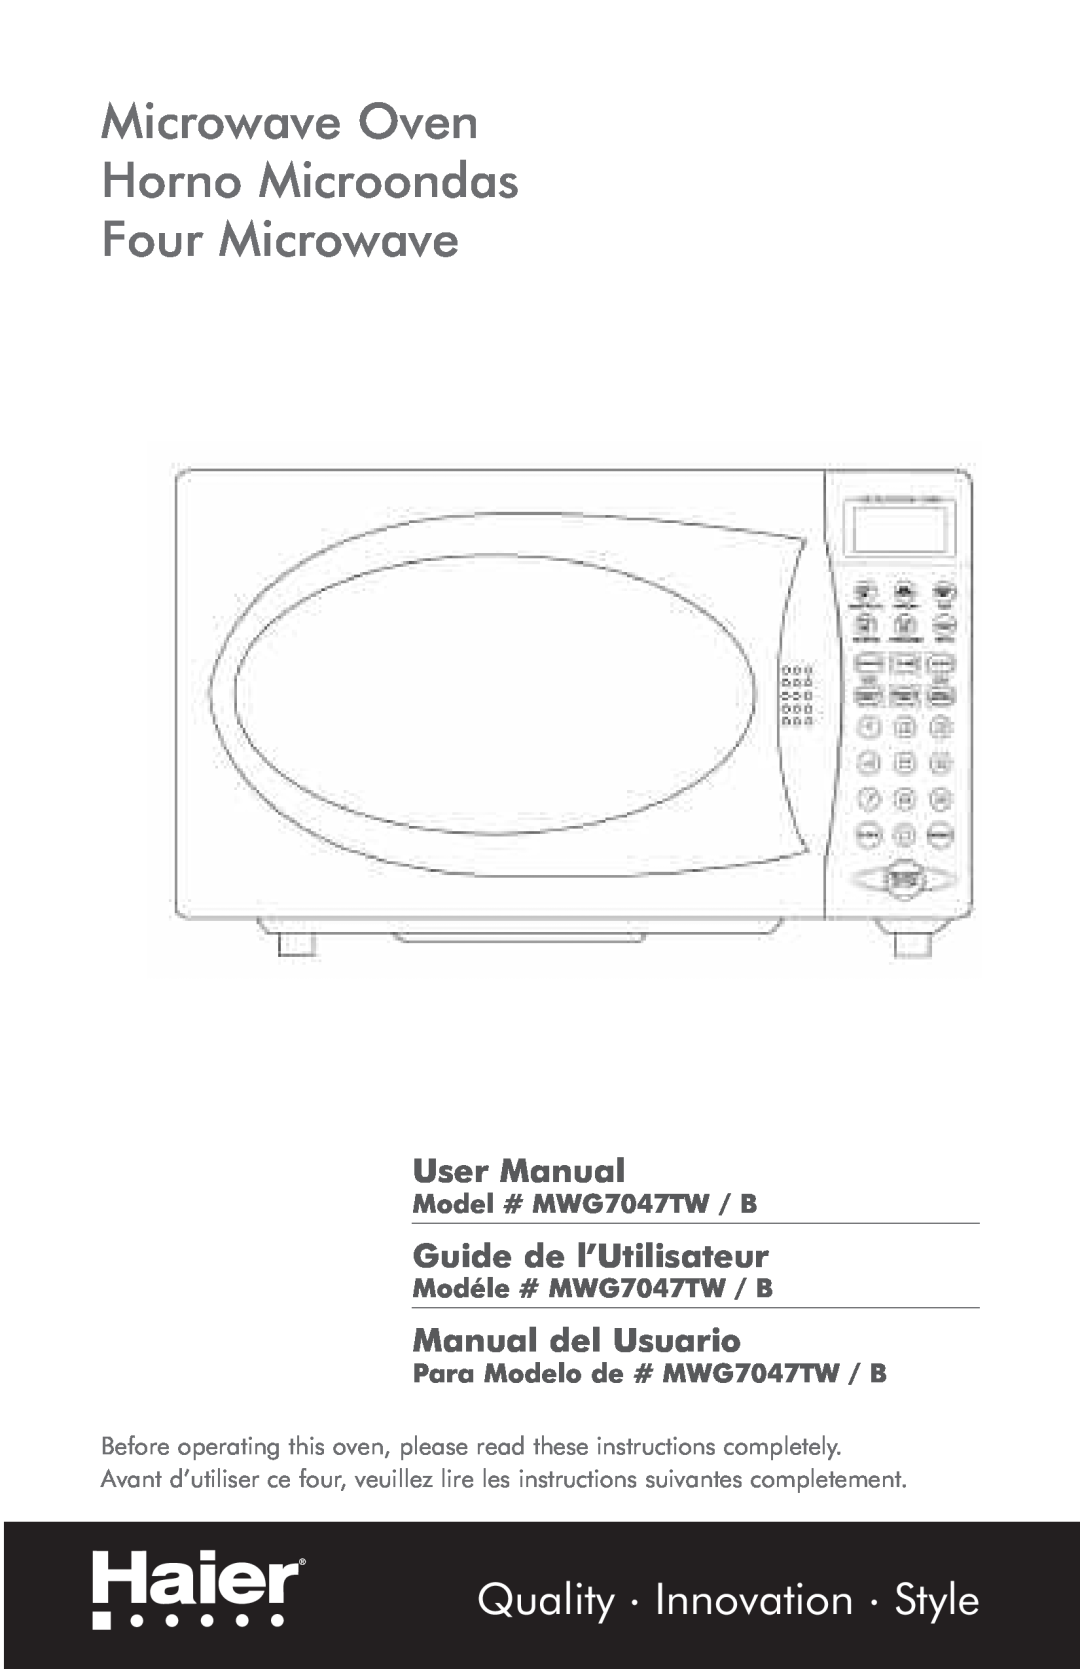 Haier MWG7047TW / B user manual Microwave Oven Horno Microondas Four Microwave, Quality Innovation Style 